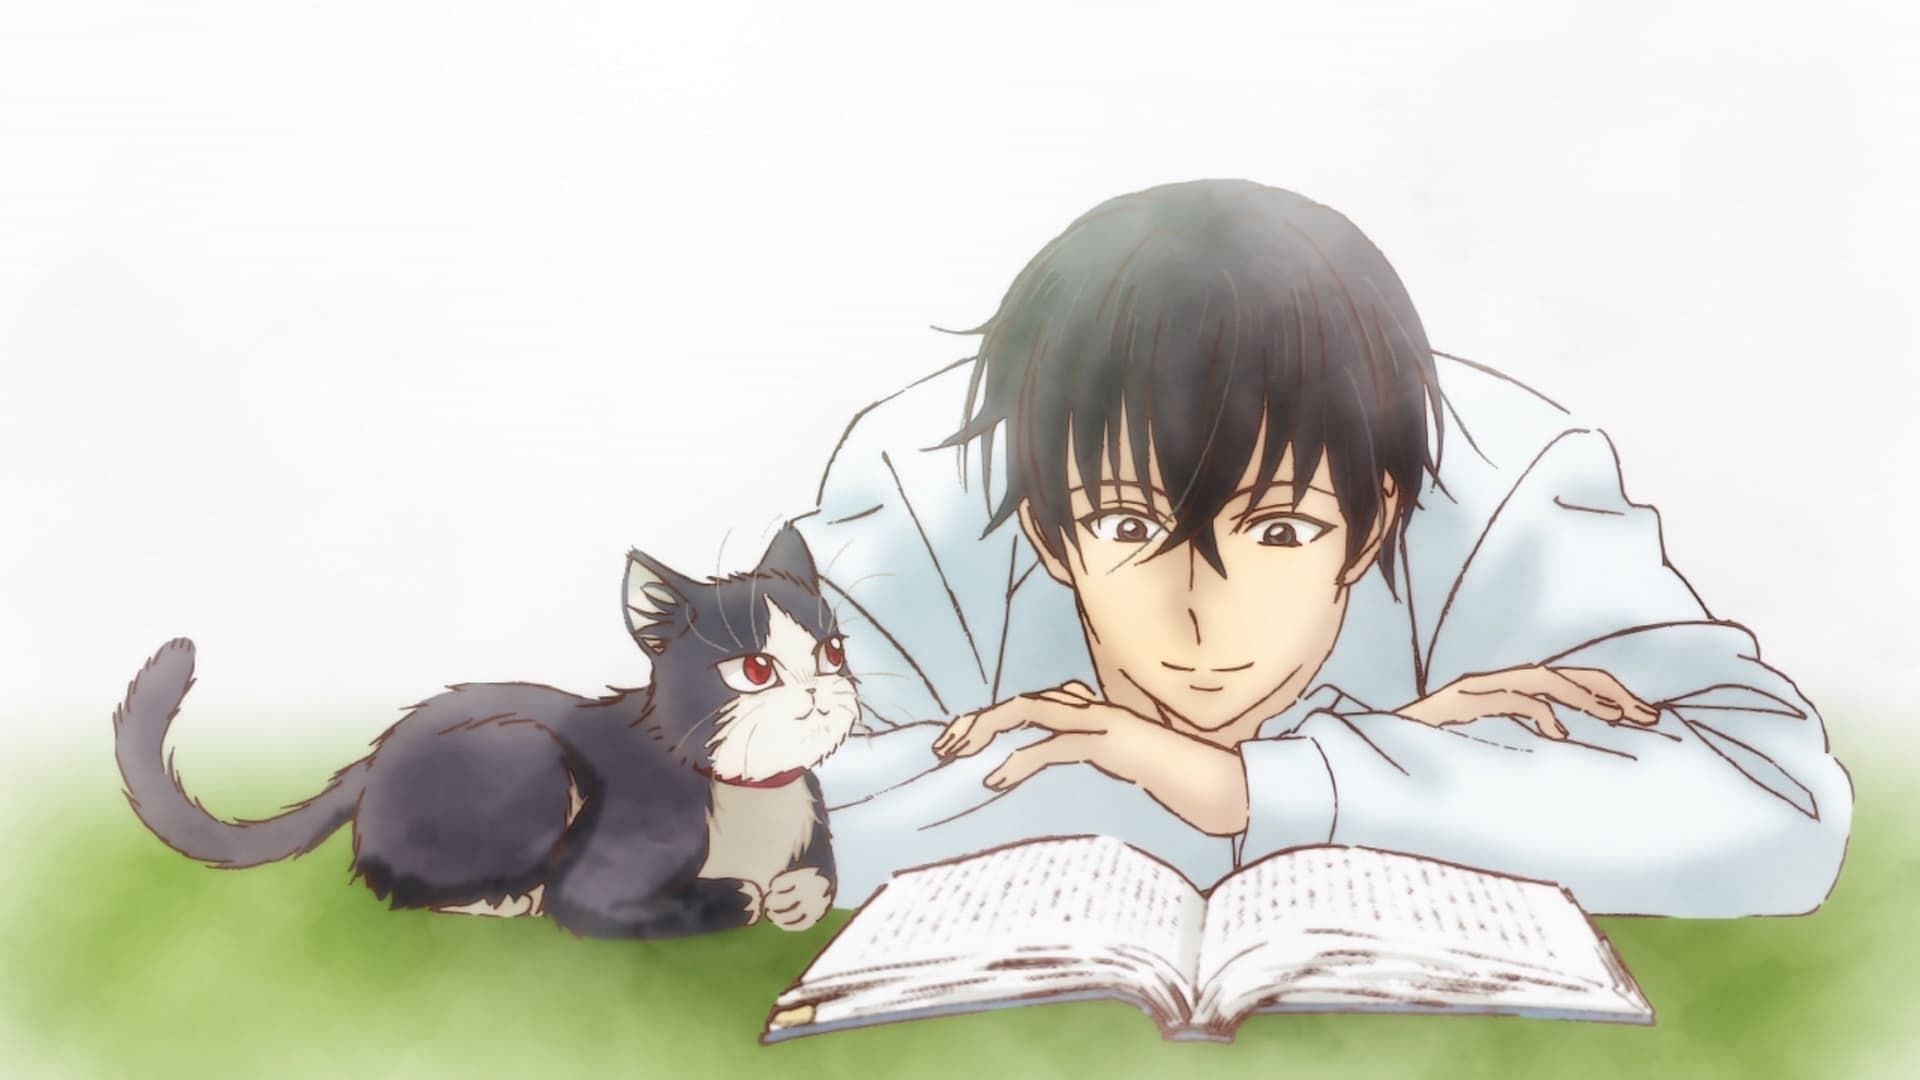 Haru and Subaru as shown in the anime (Image via My roommate is a cat)